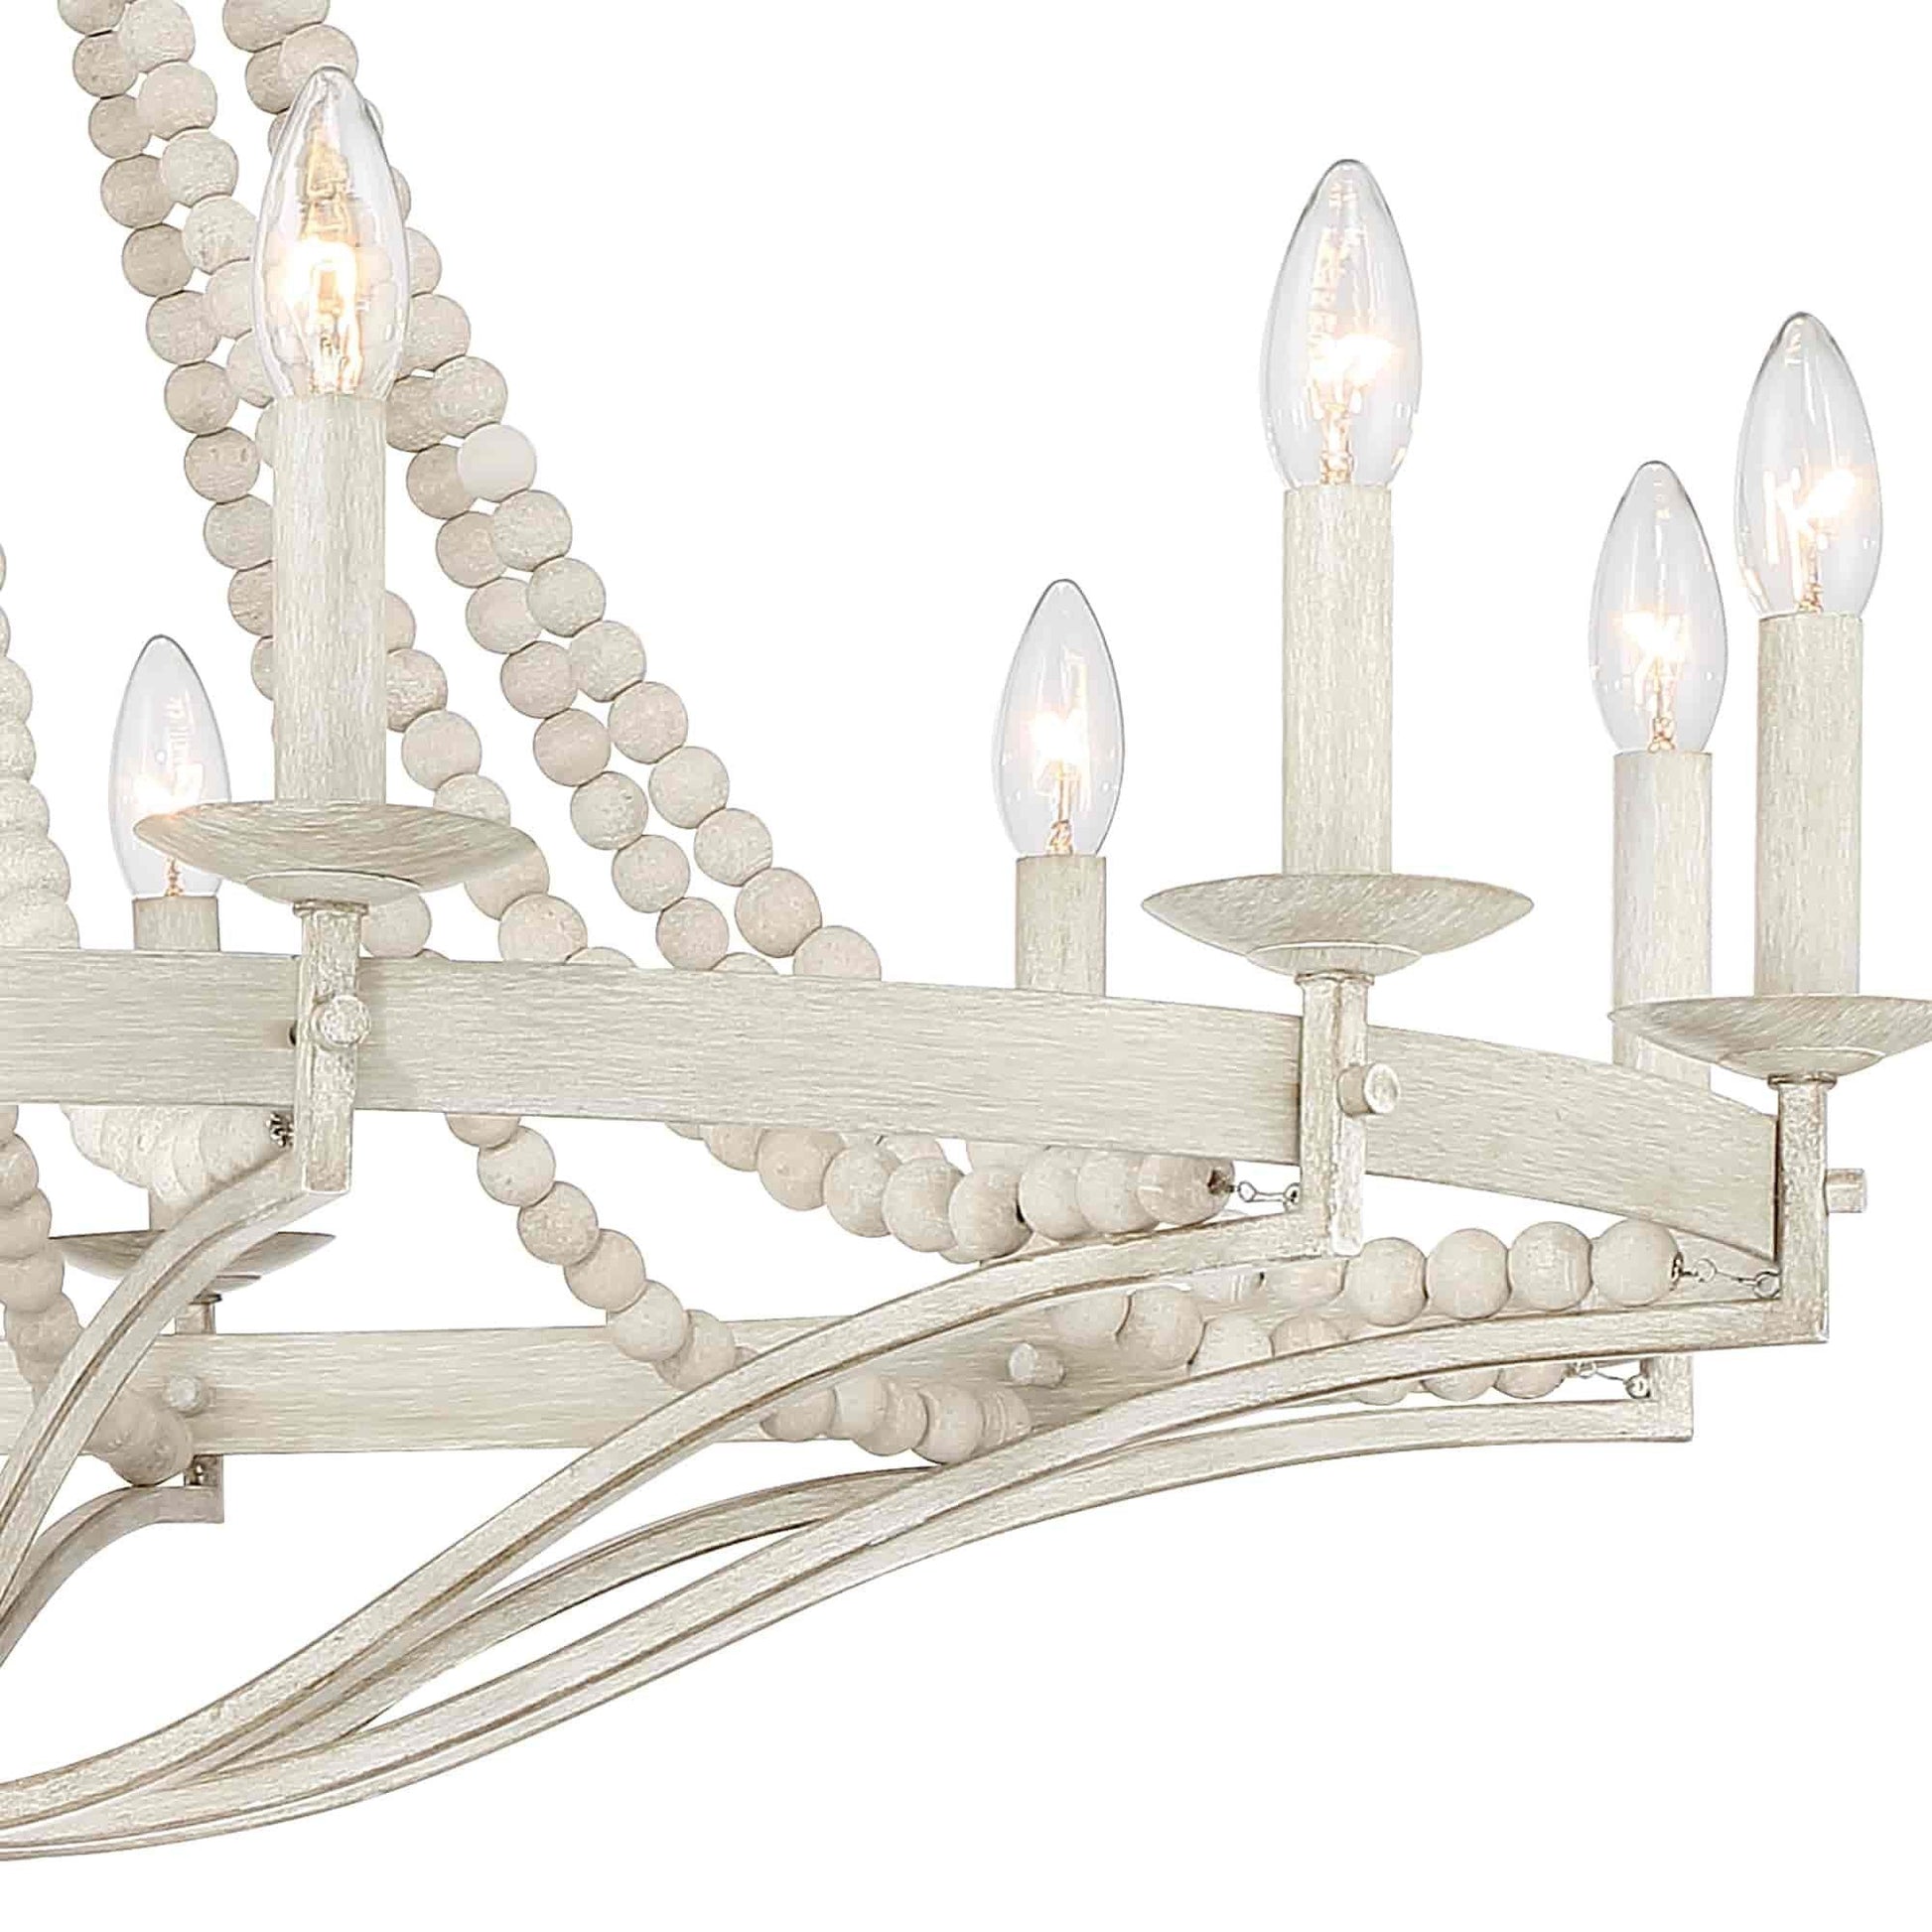 12 light candle style wagon wheel chandelier with beaded accents (10) by ACROMA